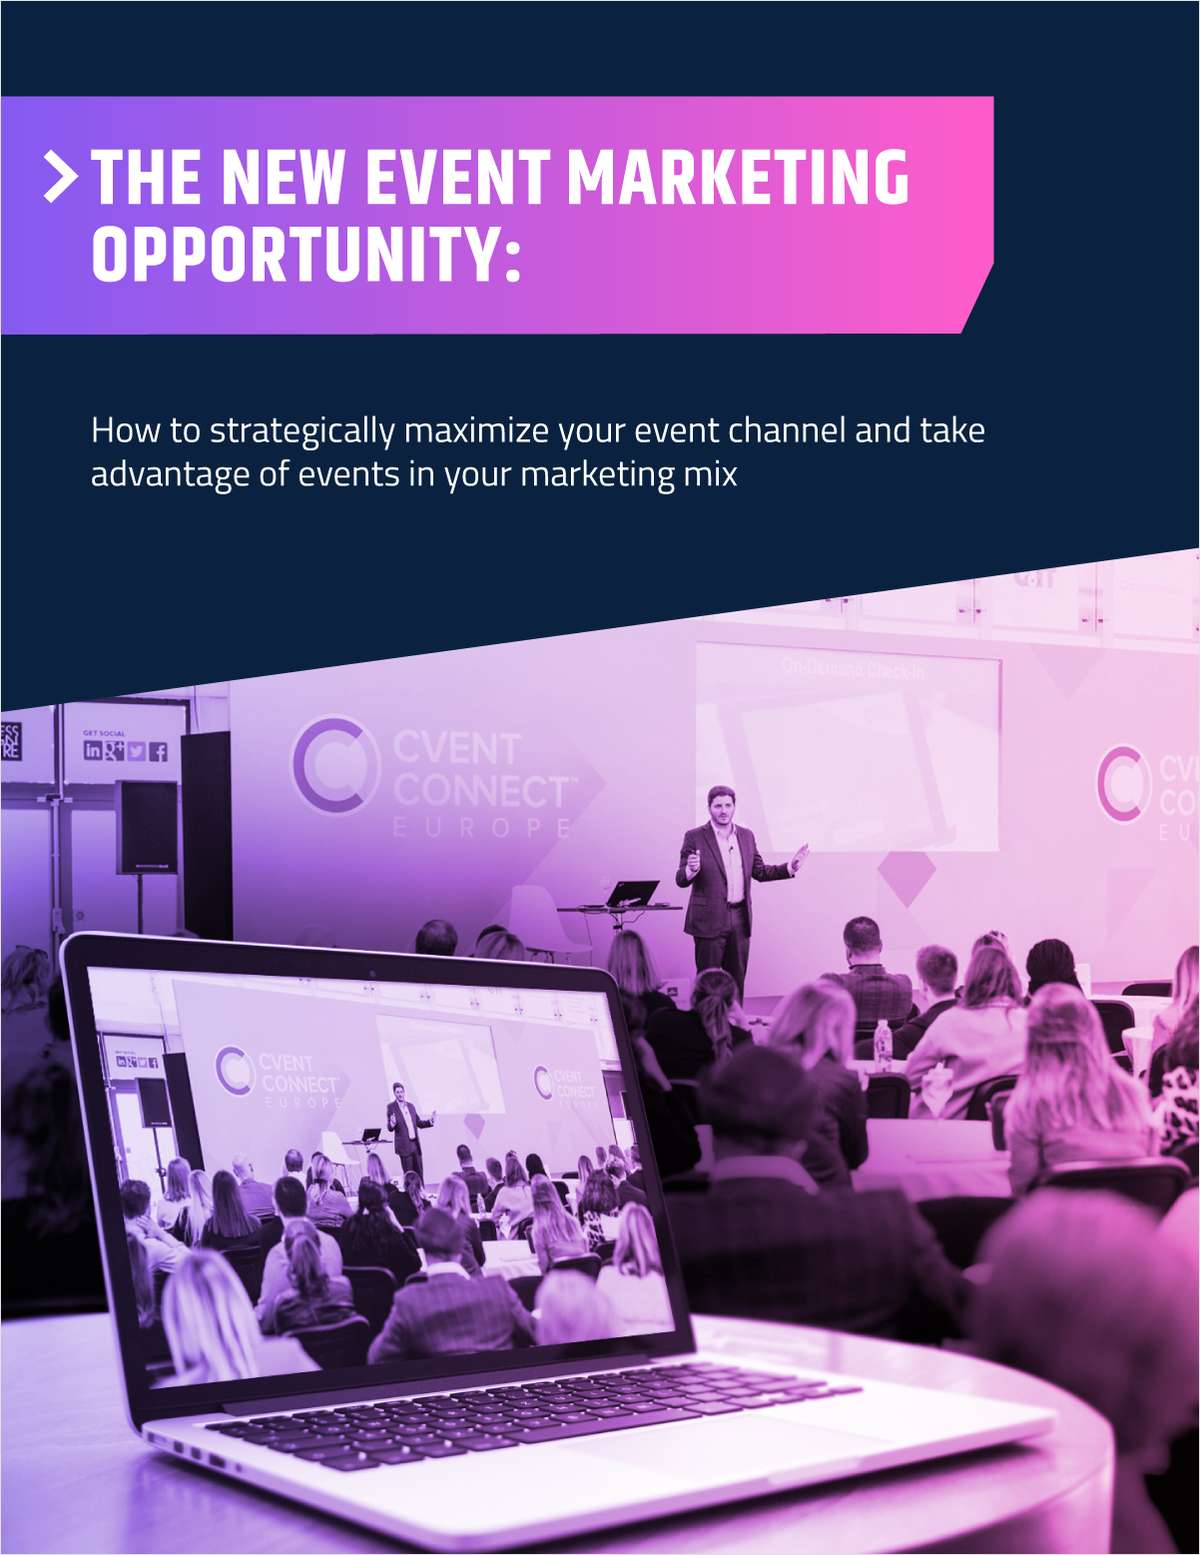 The New Event Marketing Opportunity